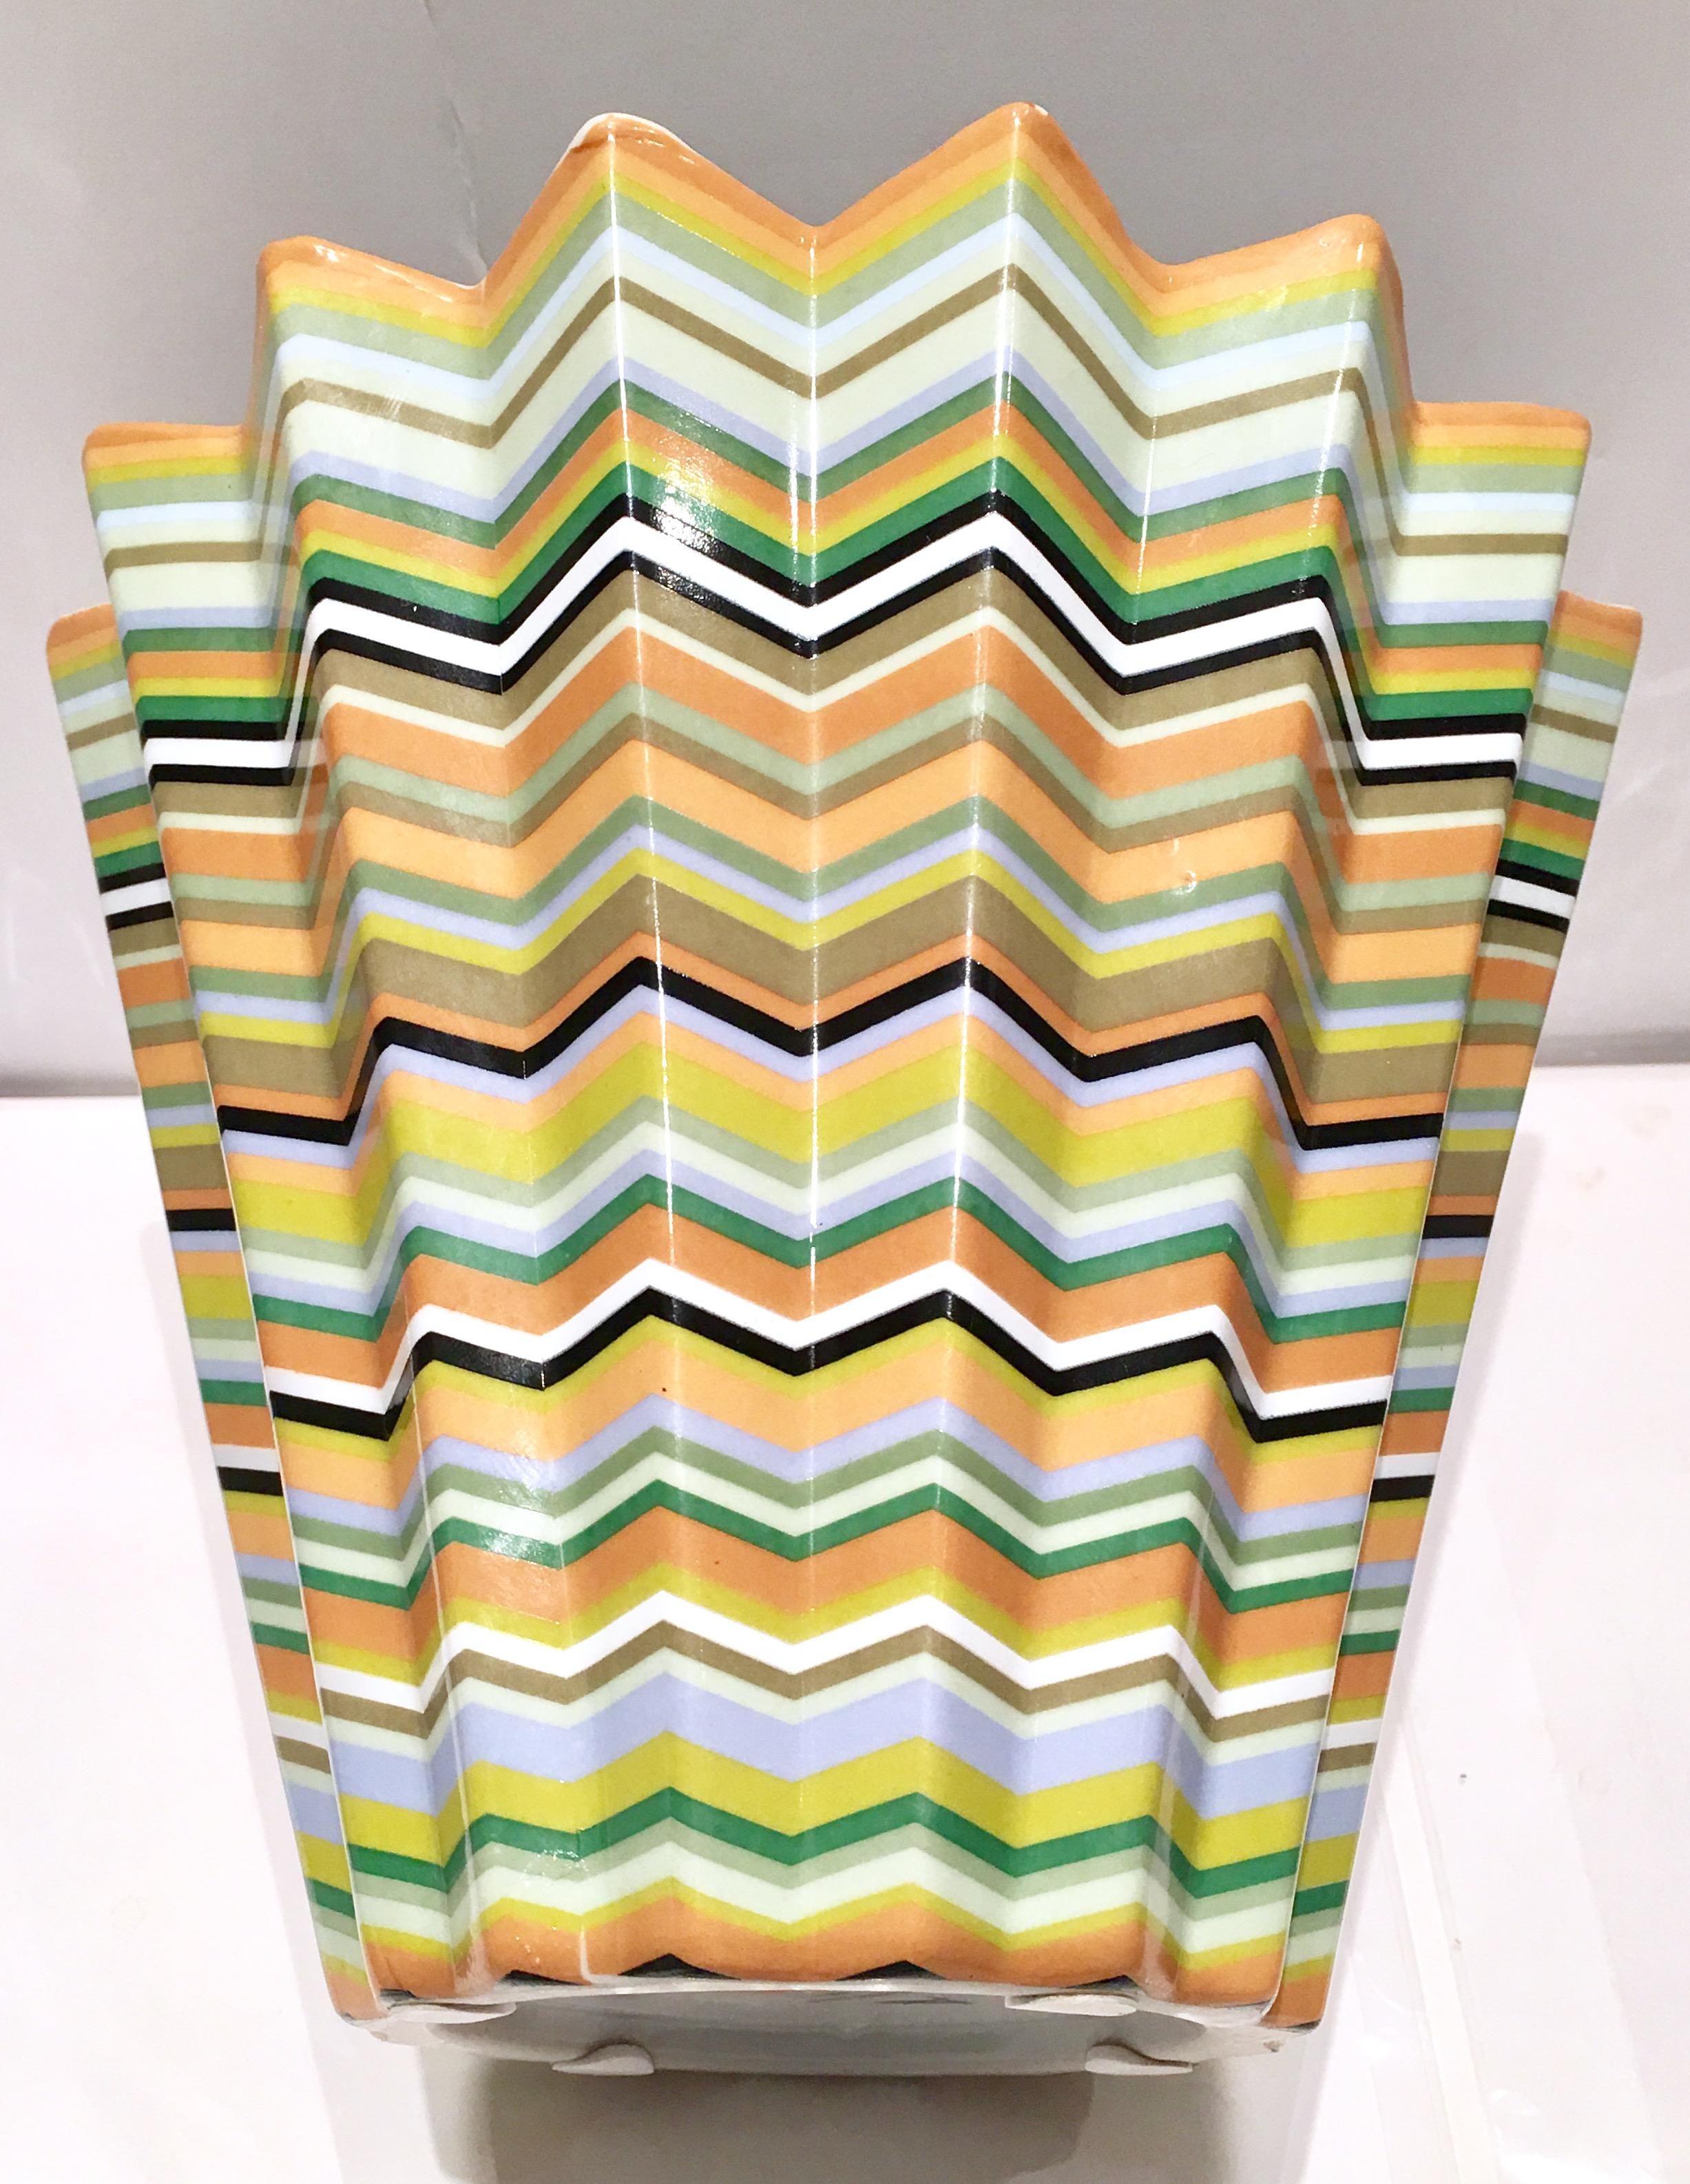 21st century rare and coveted Missoni style French porcelain Chevron large bowl by, Fabienne
Jouvin-Paris.